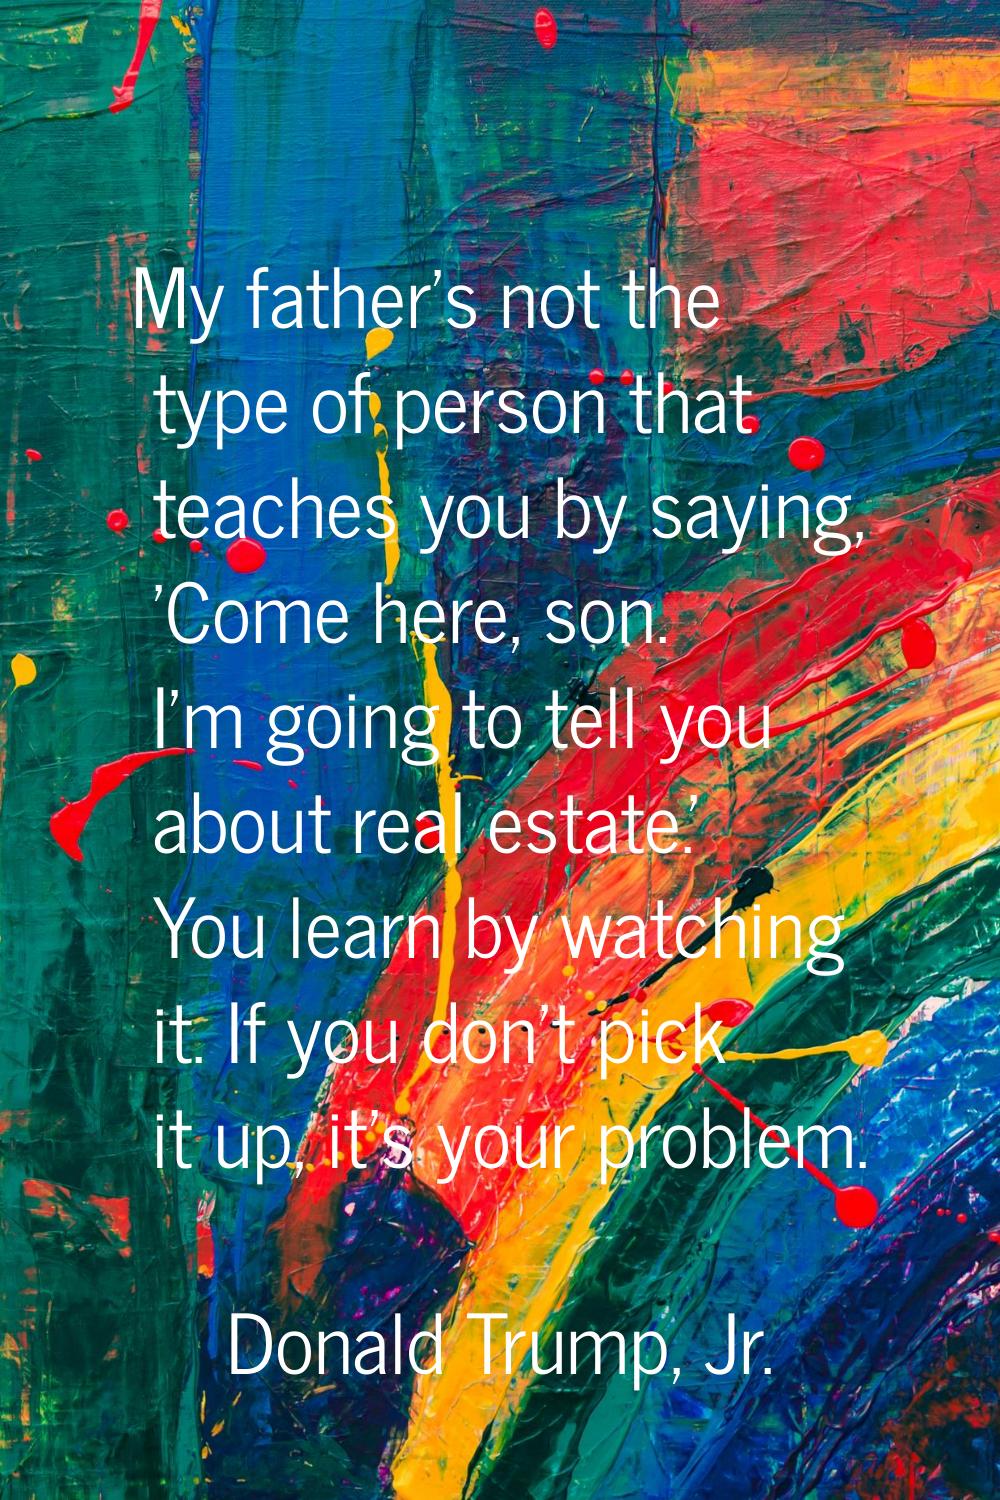 My father's not the type of person that teaches you by saying, 'Come here, son. I'm going to tell y